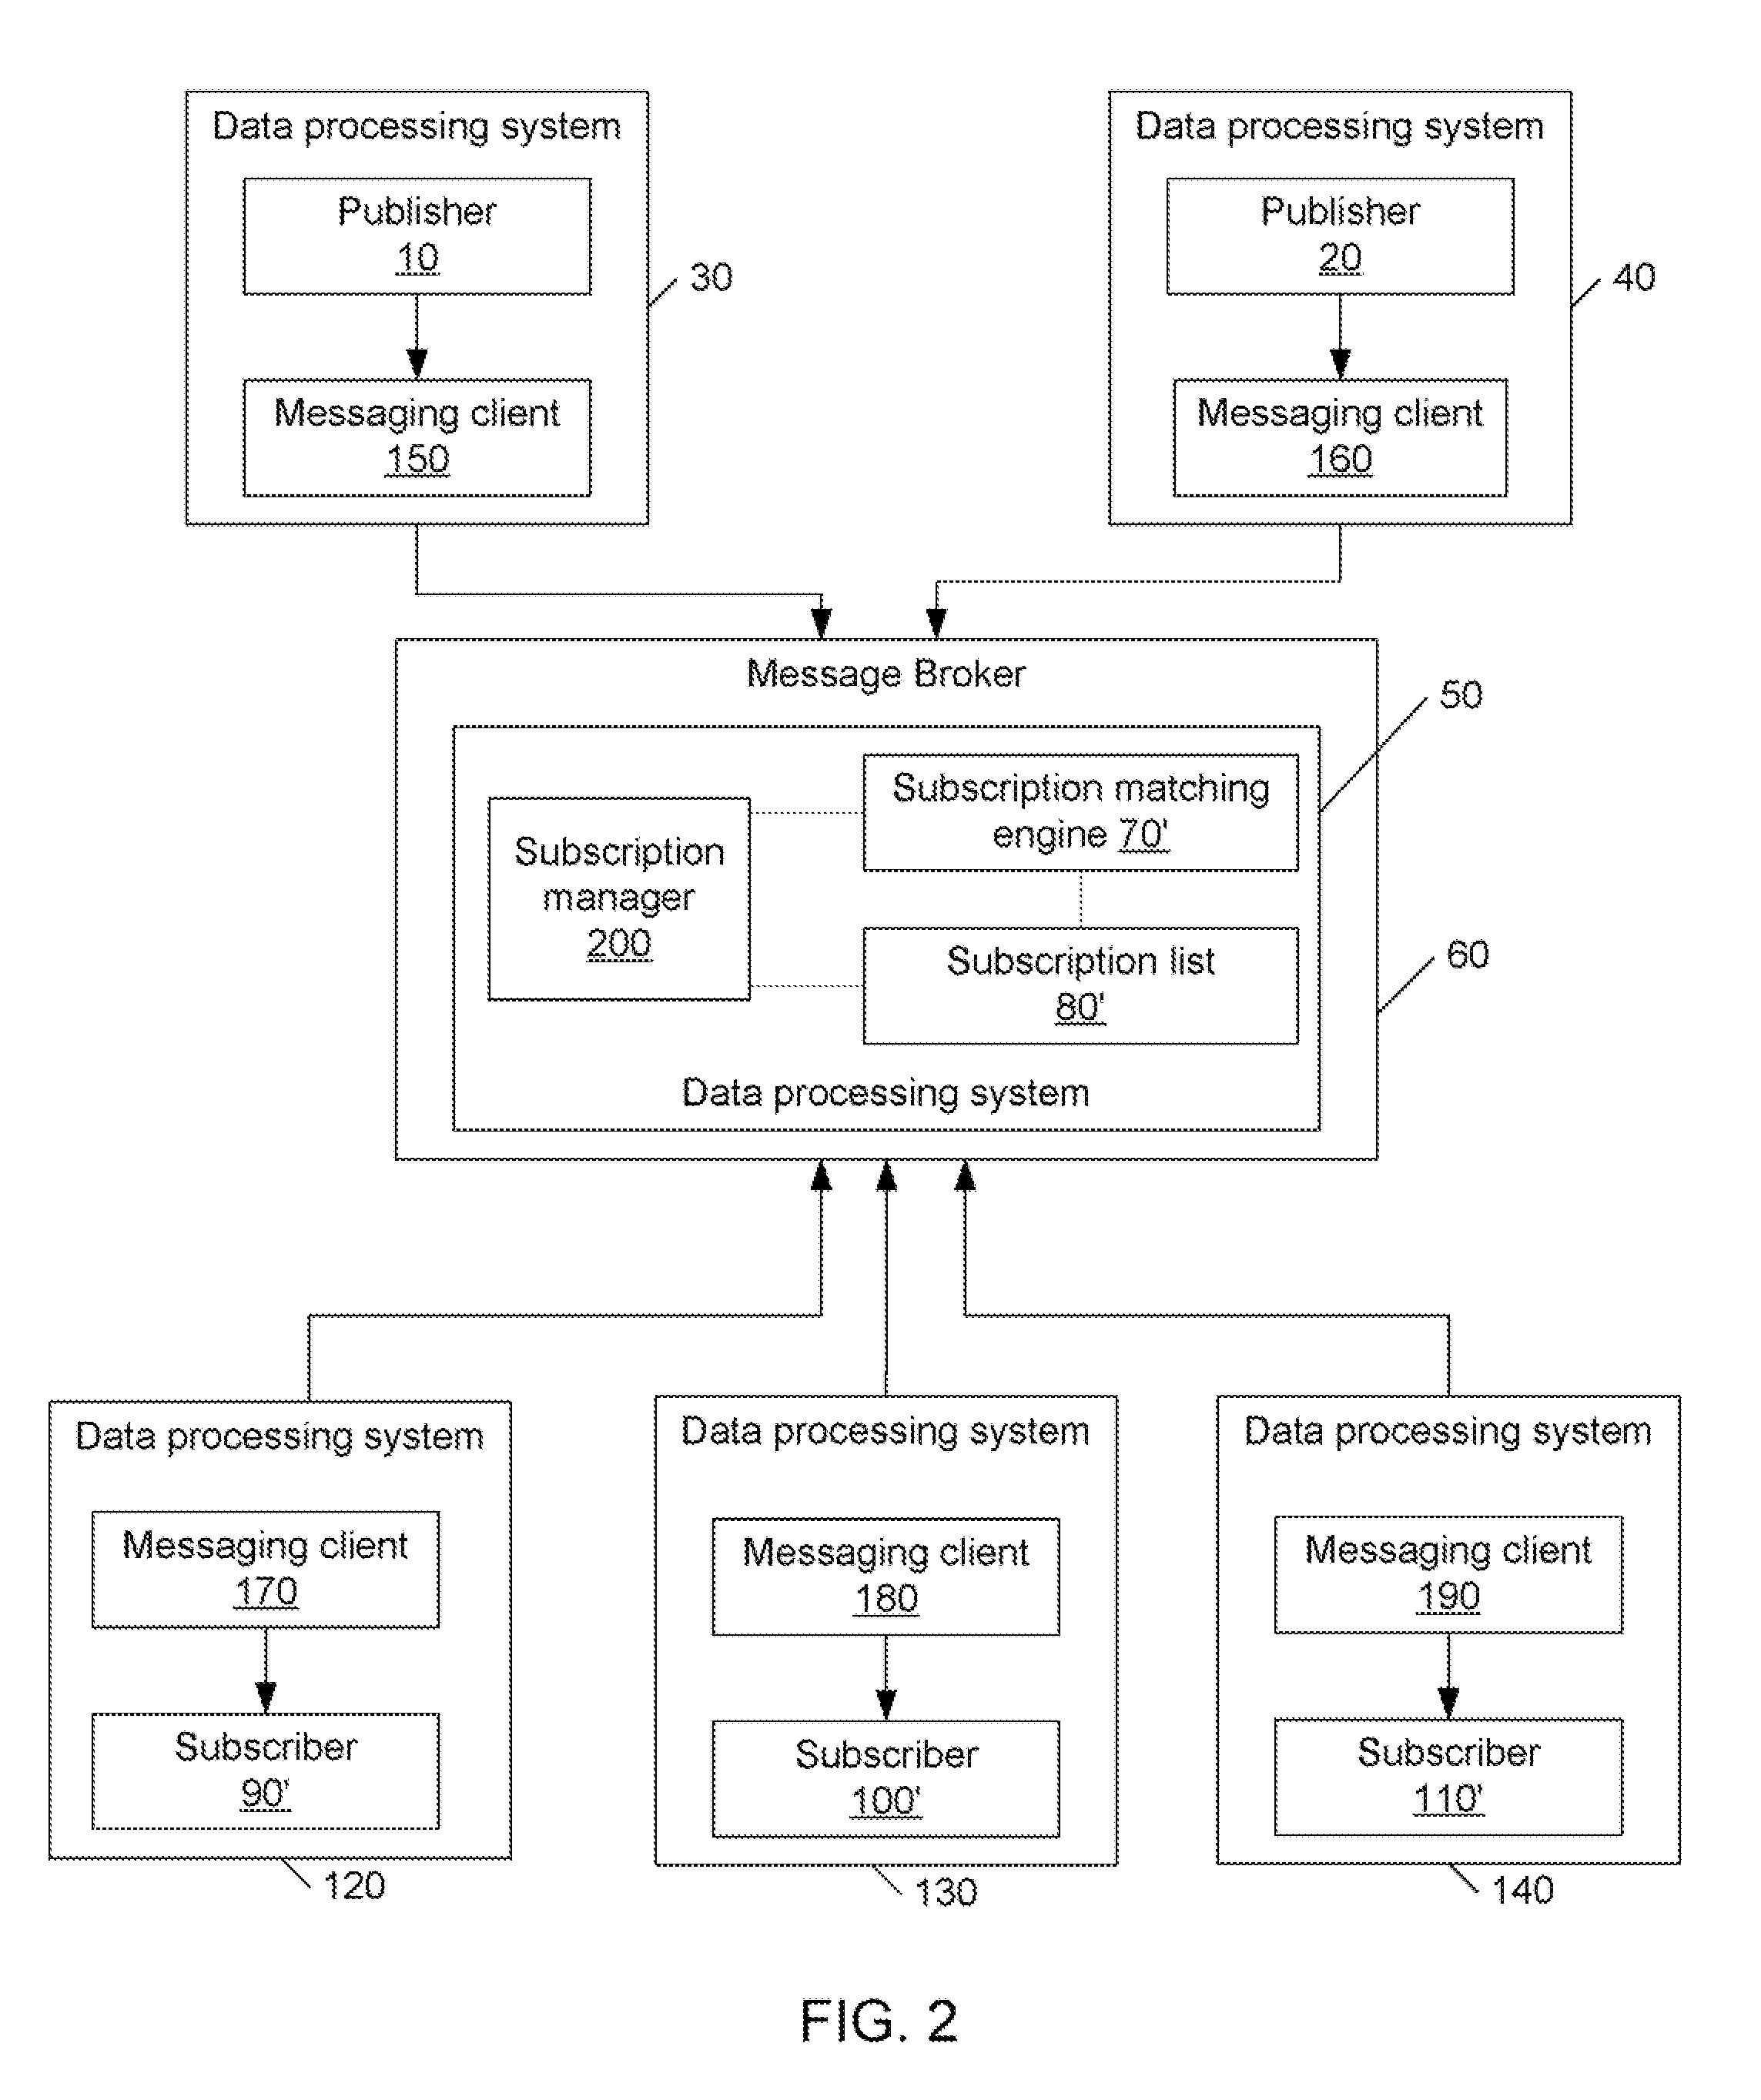 Event-Based Activation and Deactivation of Subscription Matching